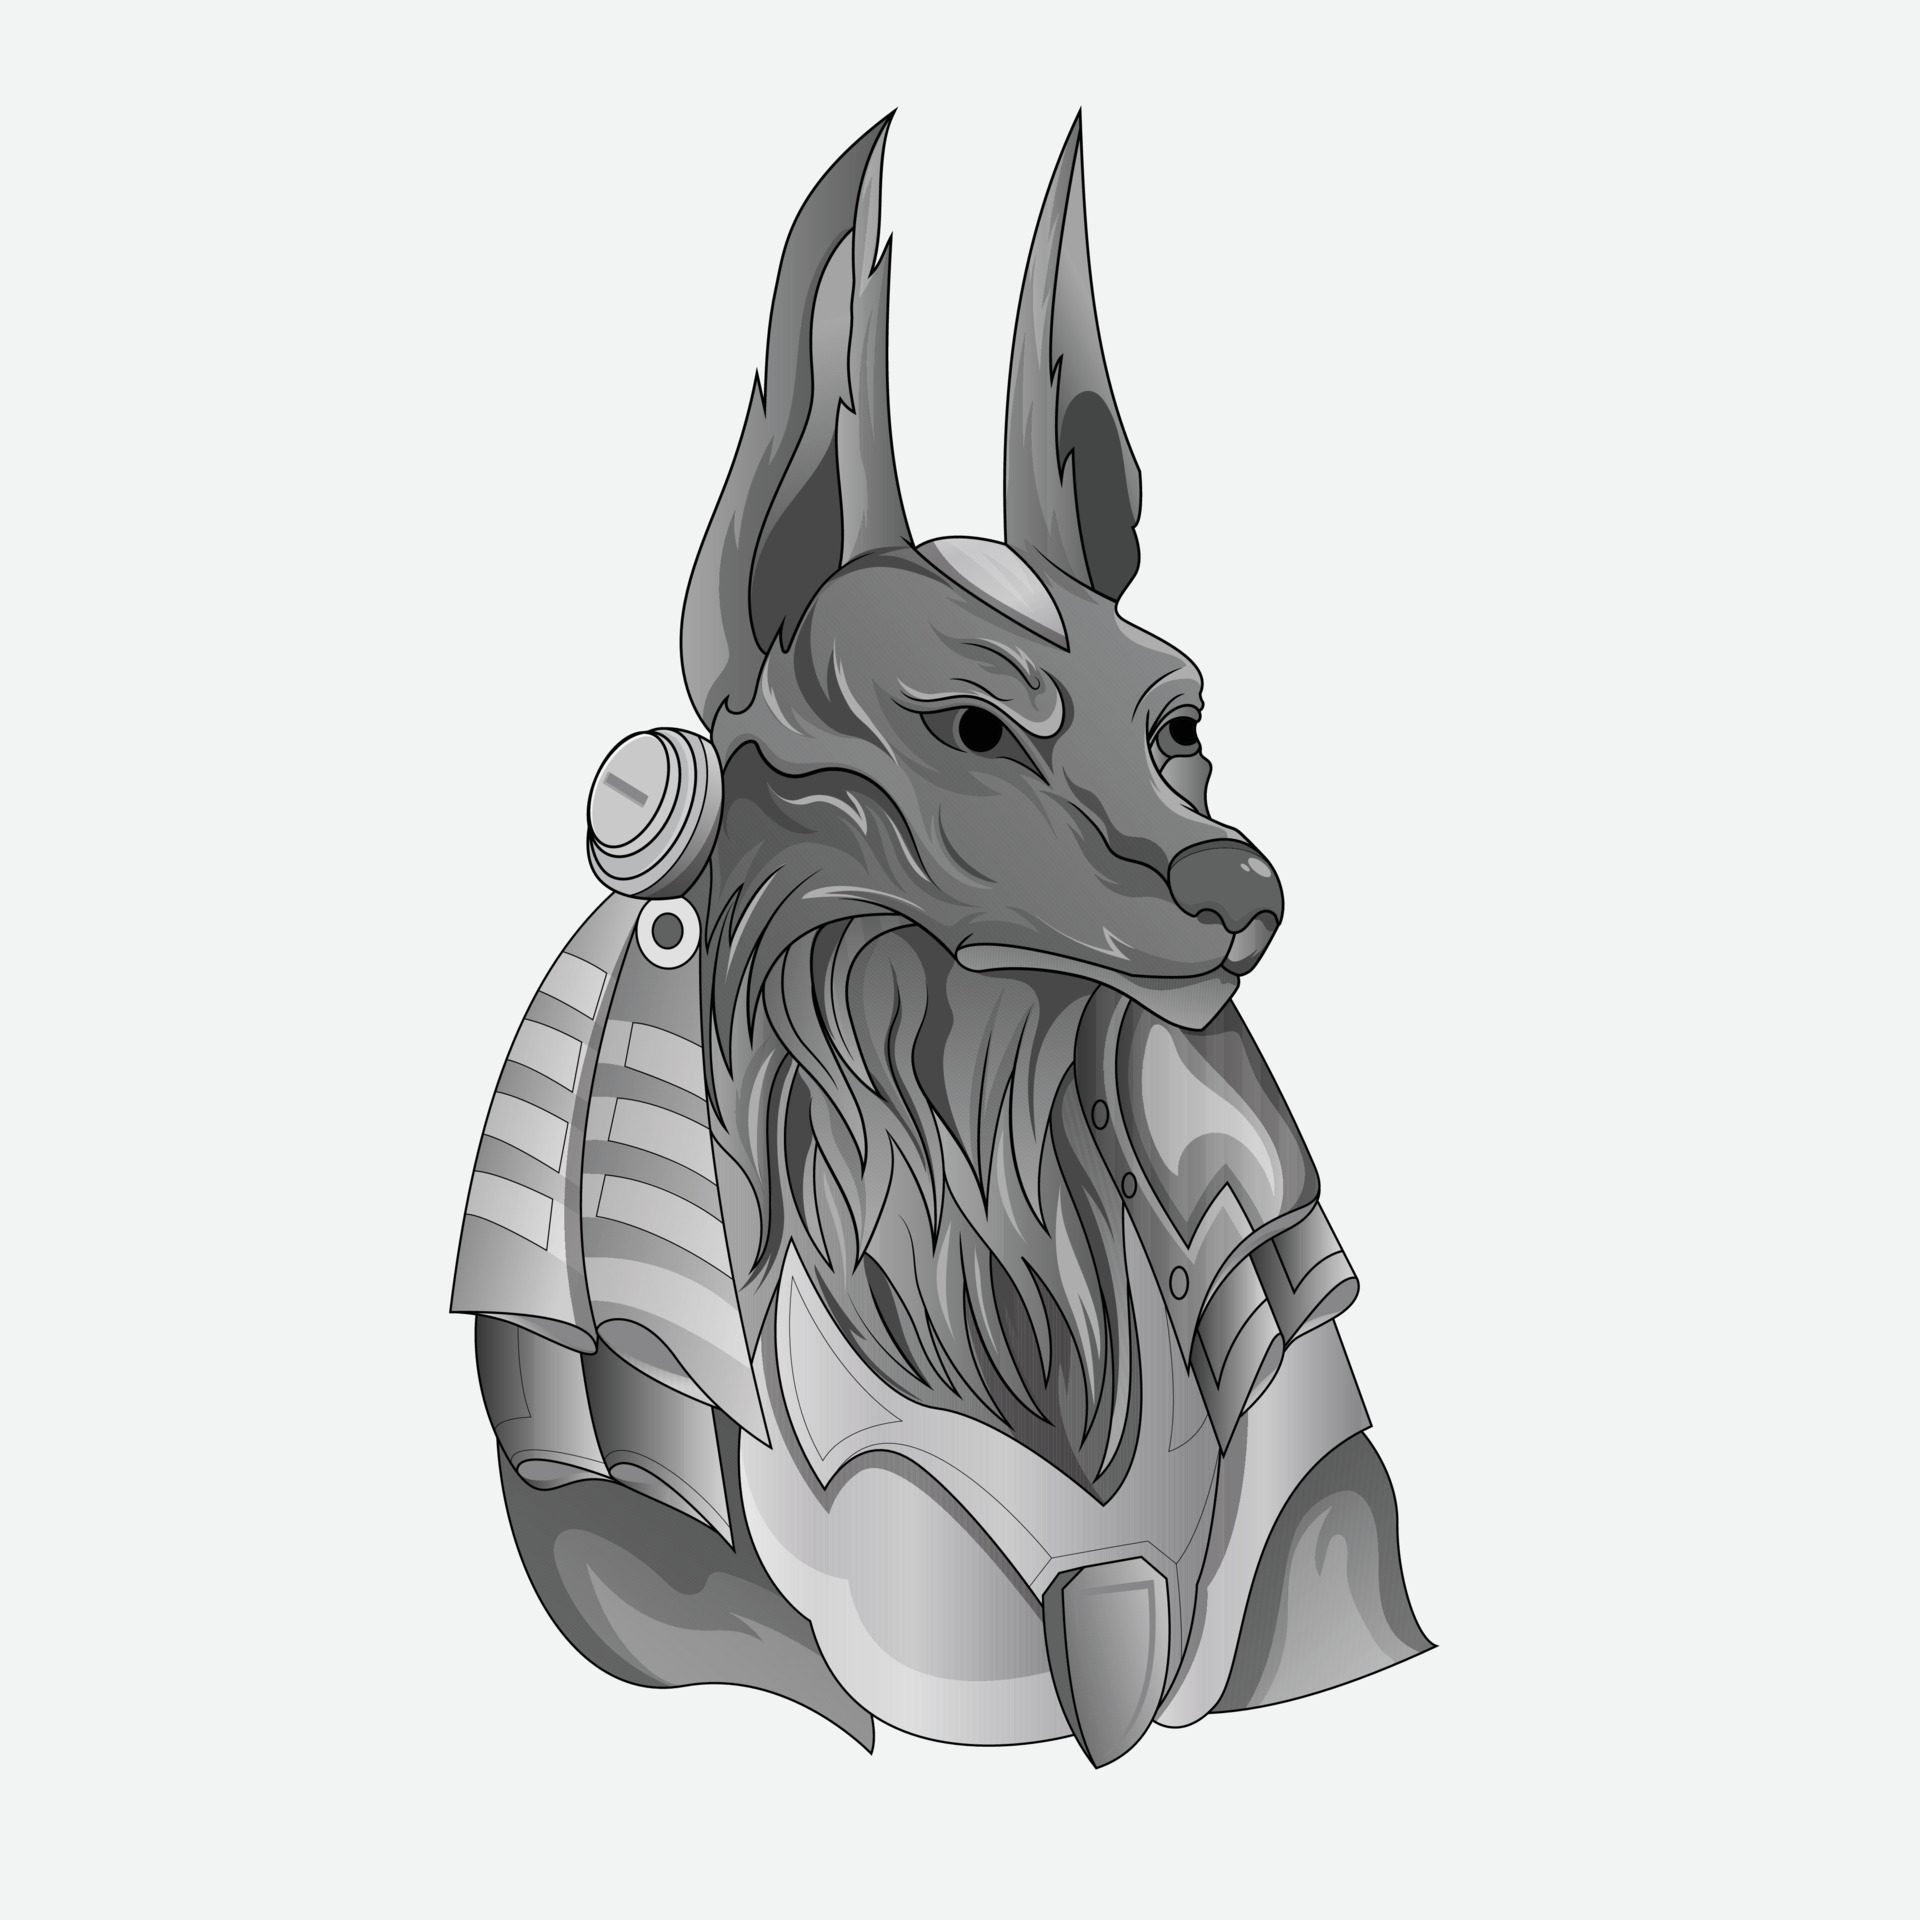 RemisTattoo  Anubis the god of death mummification embalming the  afterlife cemeteries tombs and the Underworld Archaeologists have  identified Anubiss sacred animal as an Egyptian canid the African golden  wolf Tattoo done